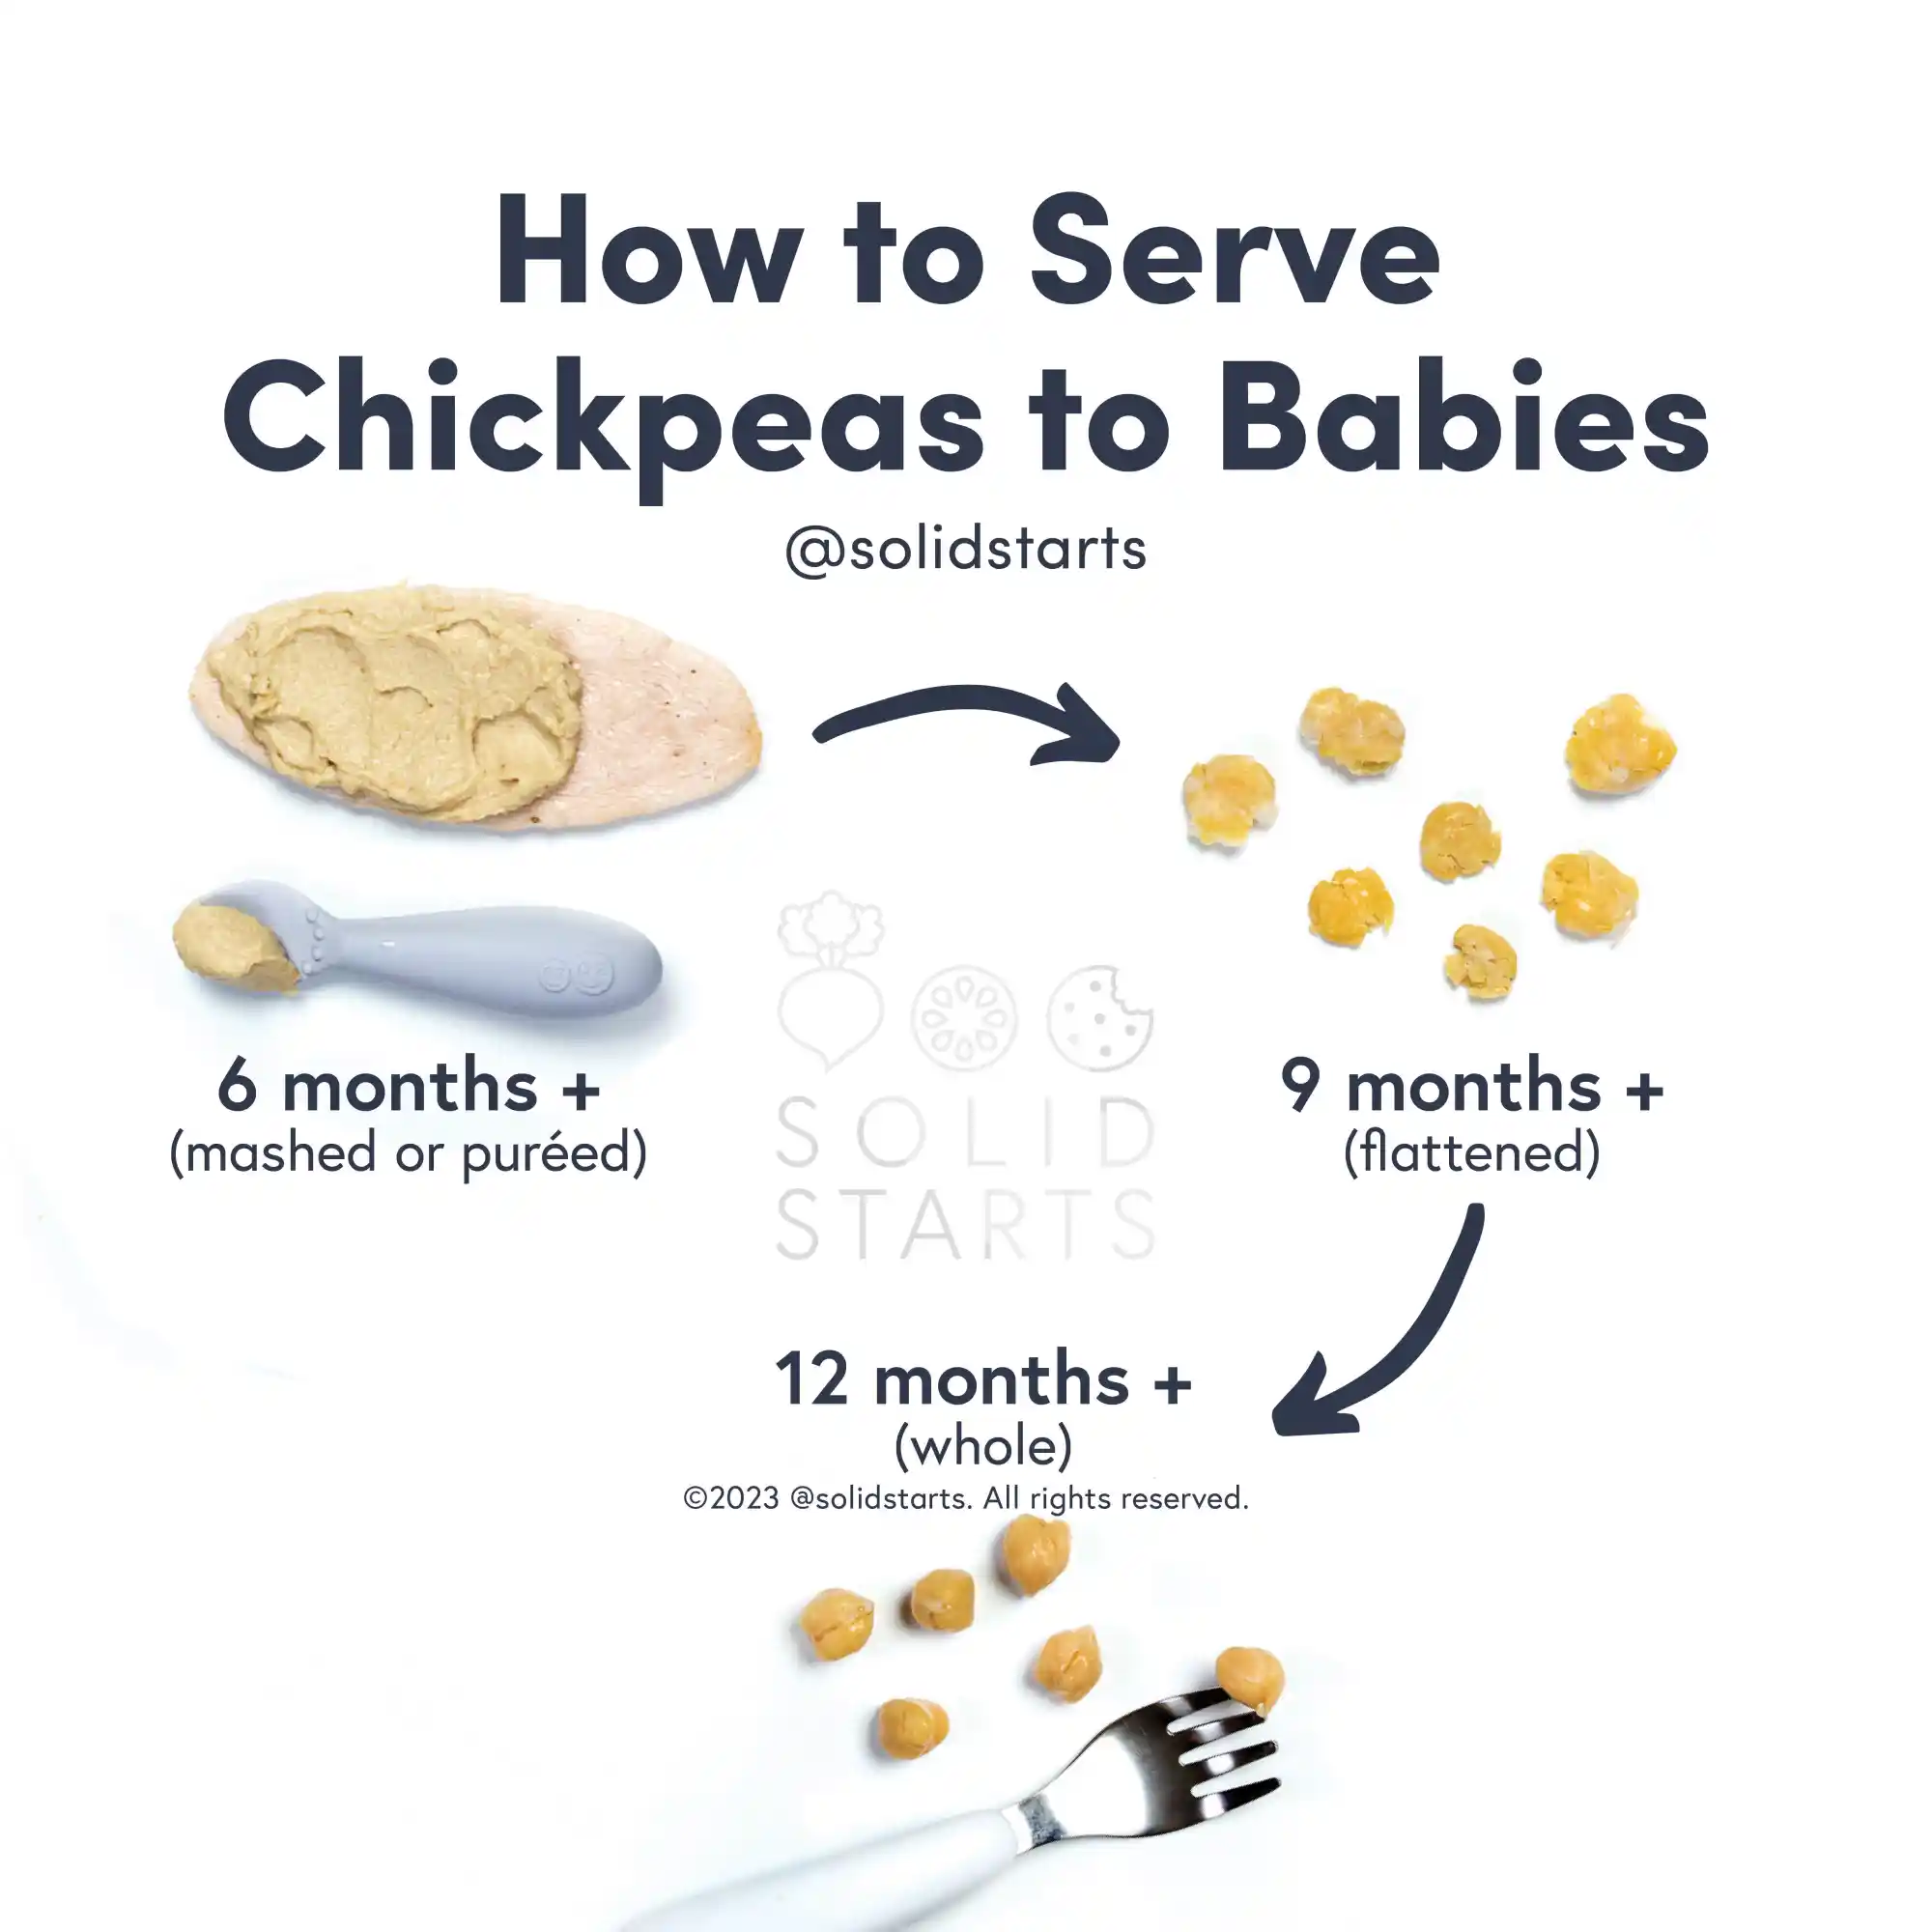 a Solid Starts infographic with the header How to Serve Chickpeas to Babies: mashed or pureed for 6 months+, flattened for 9 months+, and whole for 12 months+